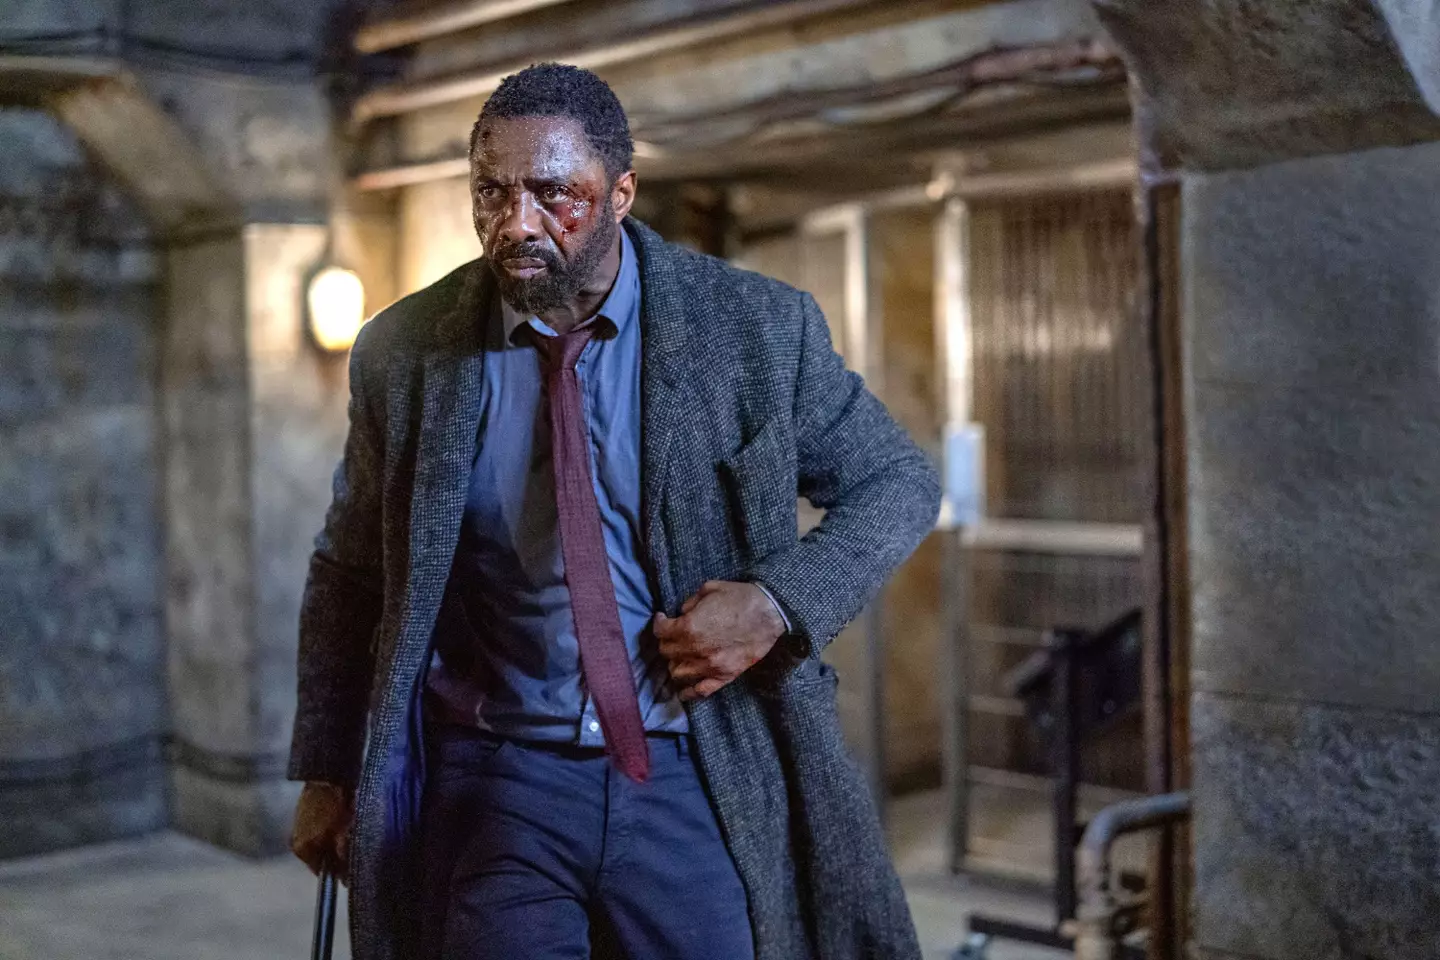 Idris Elba is back as Luther in a new movie, but he's probably not going to be the next James Bond.